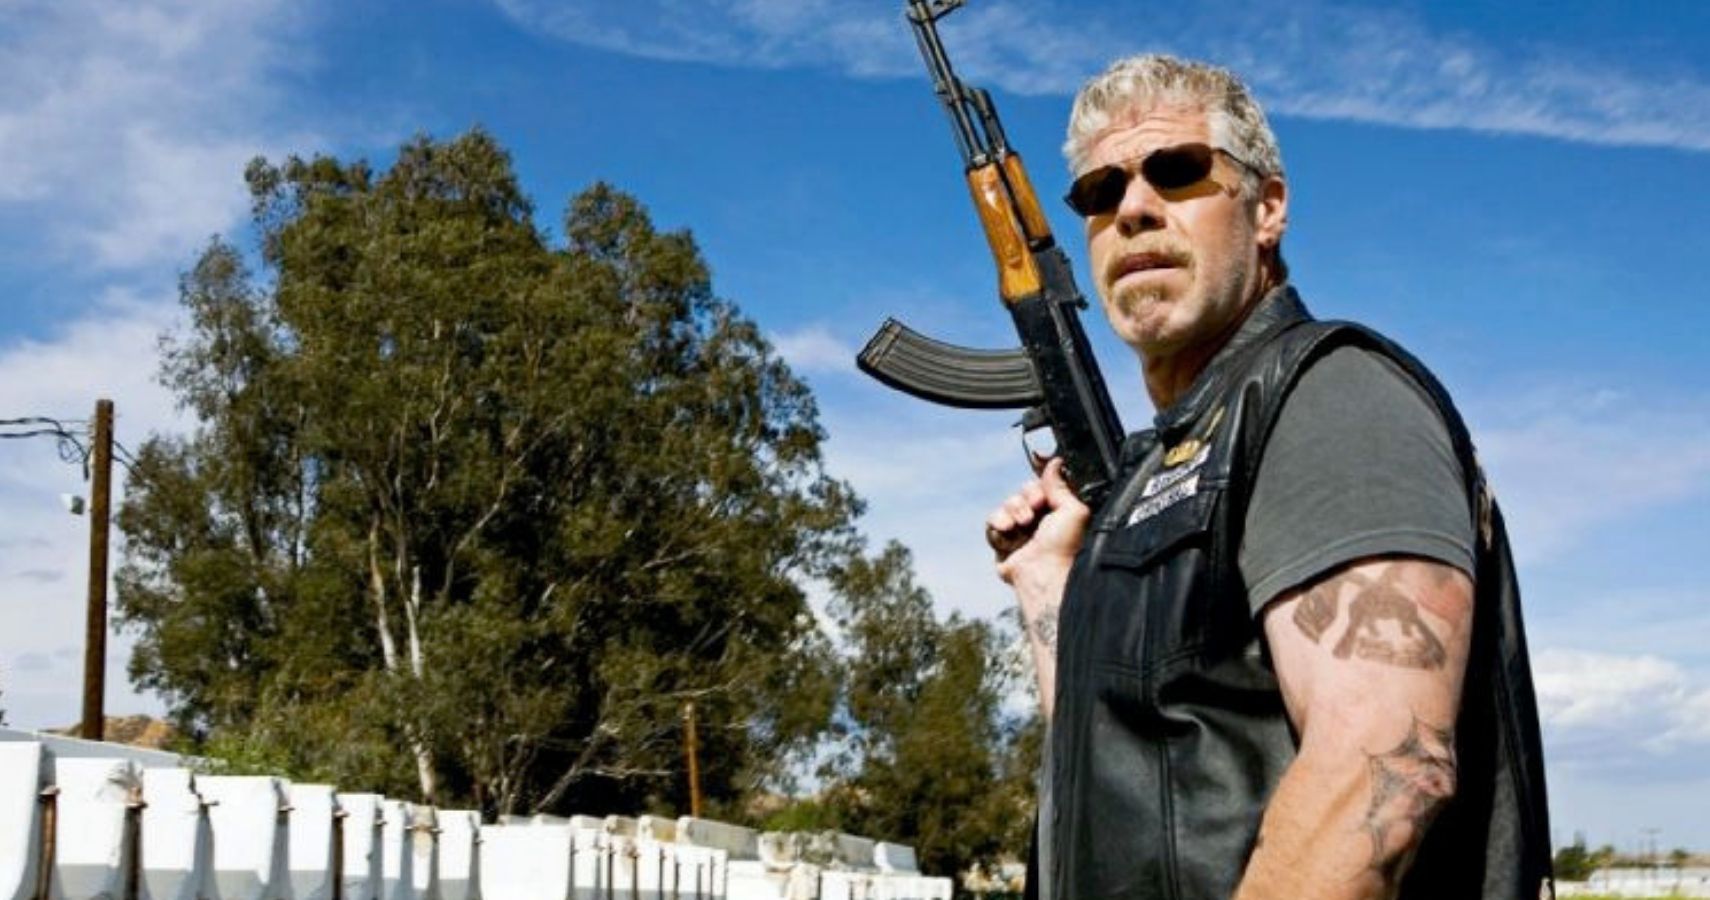 Sons of Anarchy - Ron Perlman as Clay Morrow